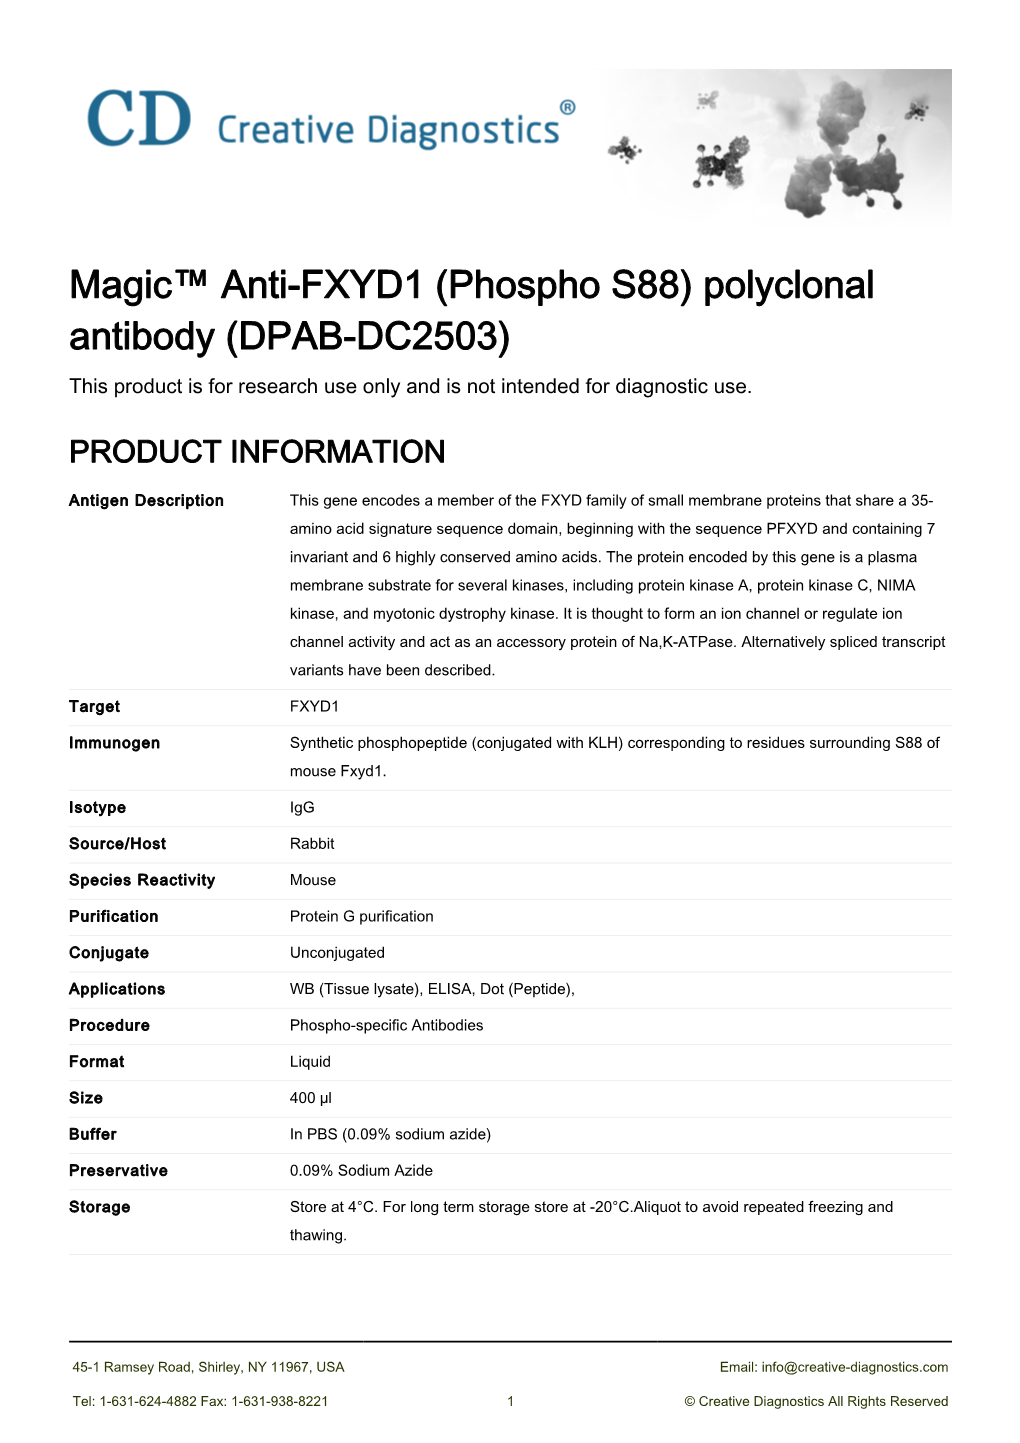 Magic™ Anti-FXYD1 (Phospho S88) Polyclonal Antibody (DPAB-DC2503) This Product Is for Research Use Only and Is Not Intended for Diagnostic Use